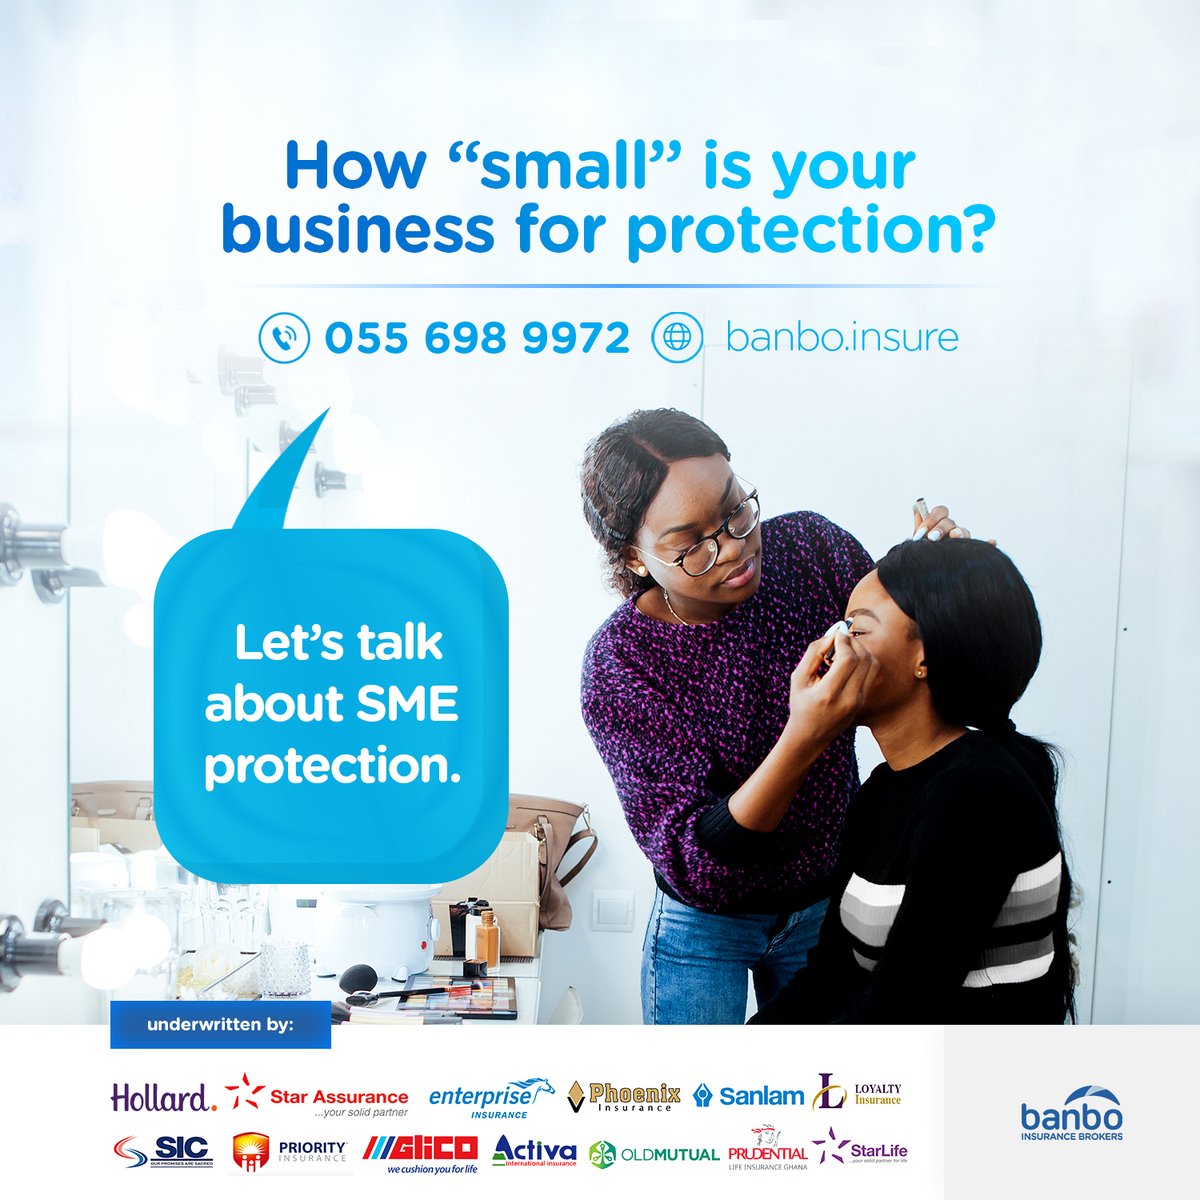 Did you know you can protect your business no matter how “small” it is?​

From the very start, we ensure you understand your risks and provide you with the peace of mind you truly deserve​.

#InsuranceAdvocate #Banbo #HassleFree #insurance #motorinsurance #ChooseBanbo